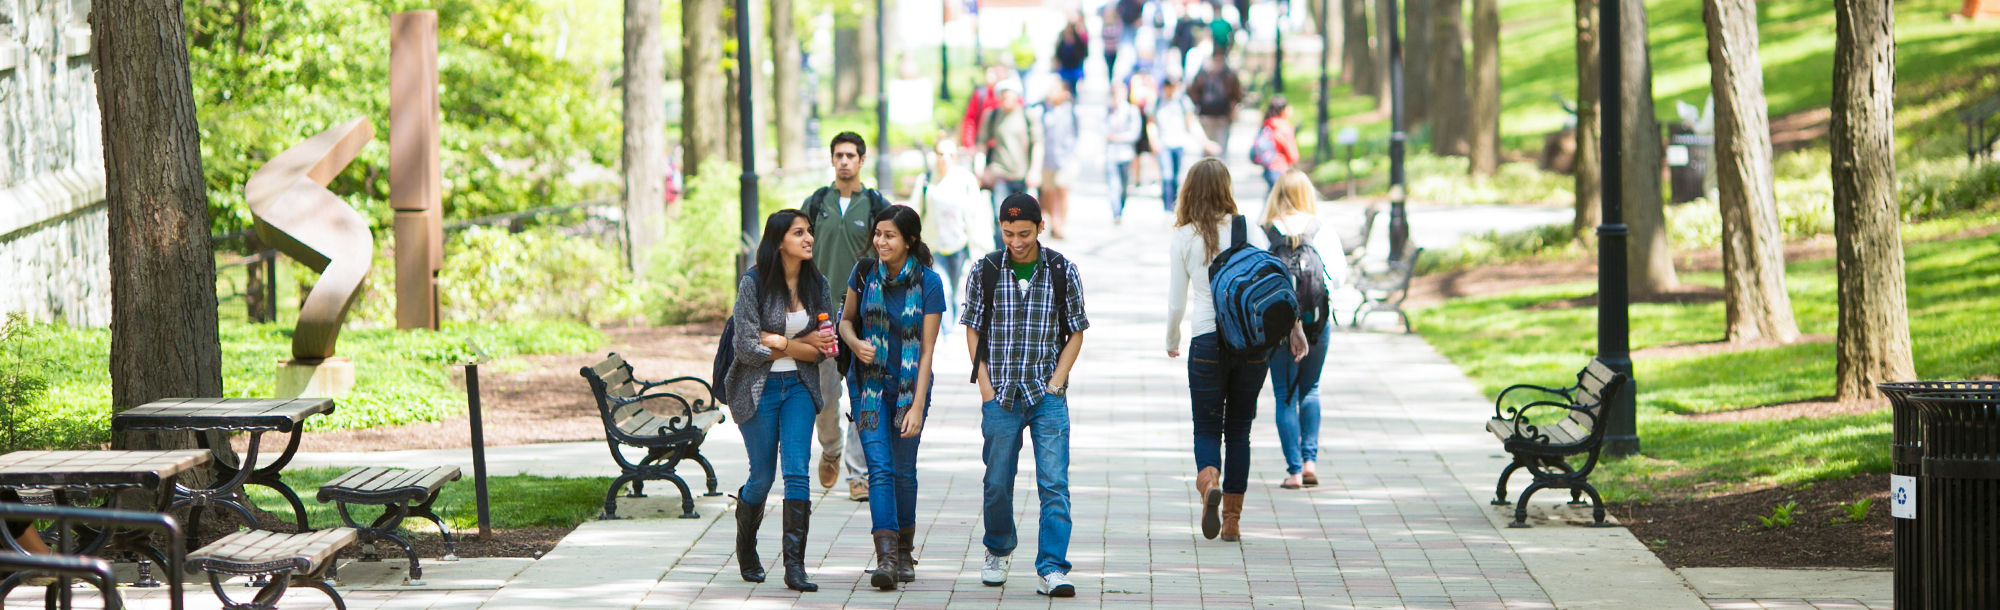 Group of students walking down a path on campus